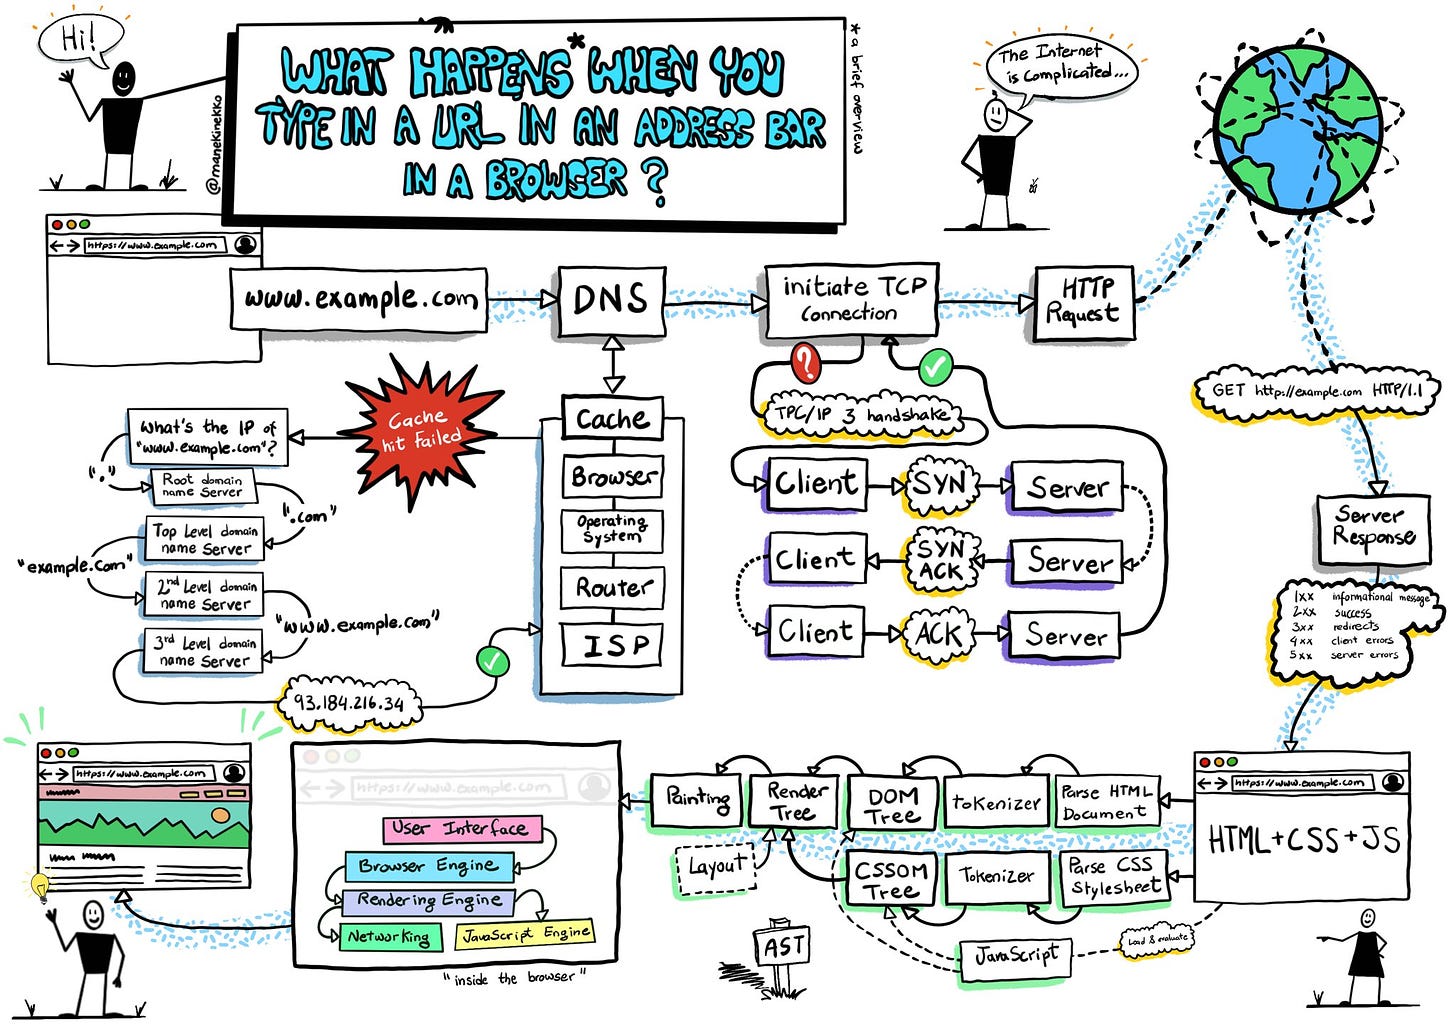 Wassim Chegham on Twitter: "Ever wondered what happens when you type in a  URL in an address bar in a browser? Here is a brief overview...  #programming #web #sketchnotes https://t.co/XnIIOPGMga" / Twitter